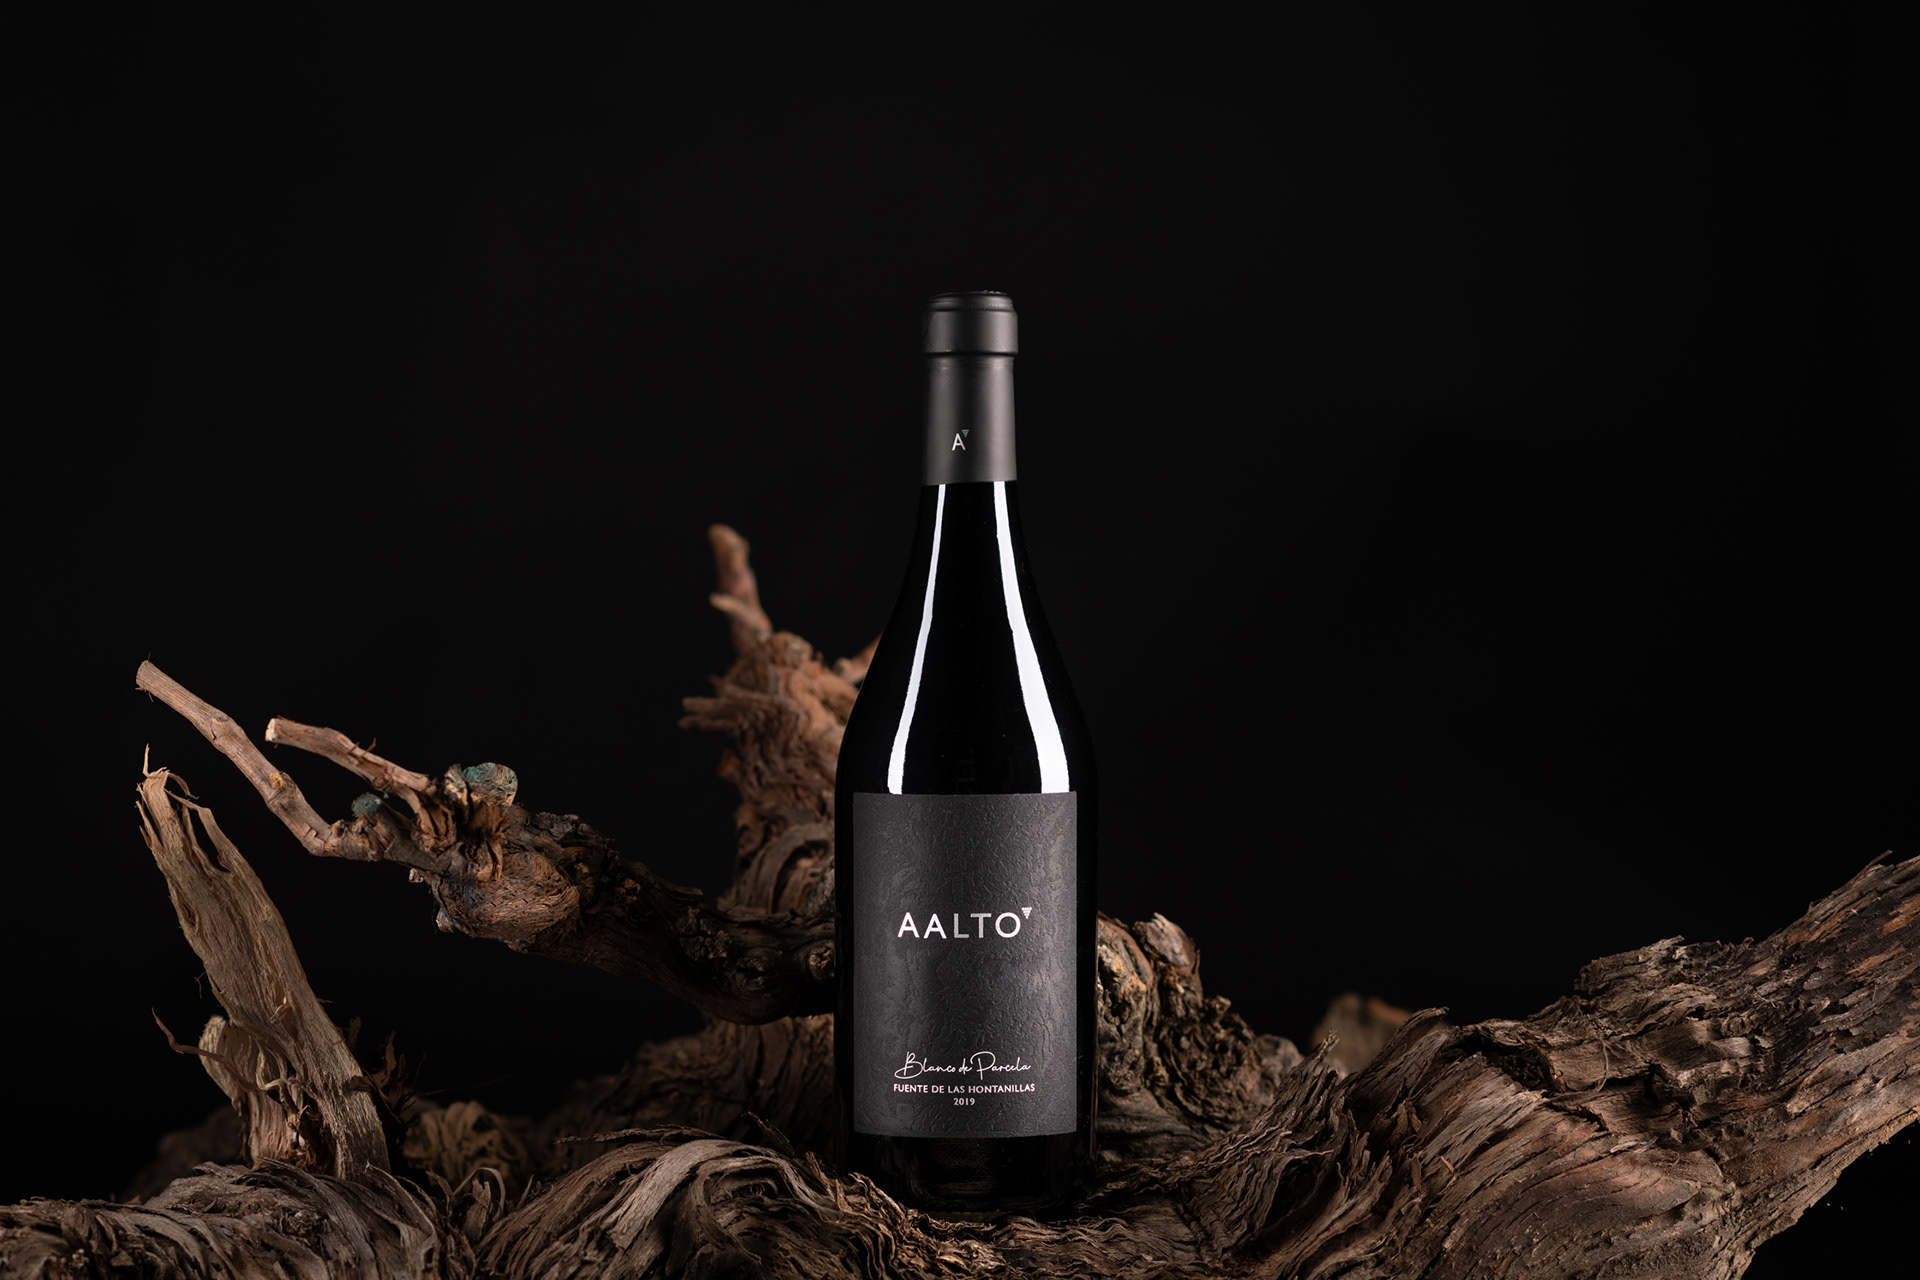 Label Design for the First Limited White Wine of Aalto Winery by Azote Studio